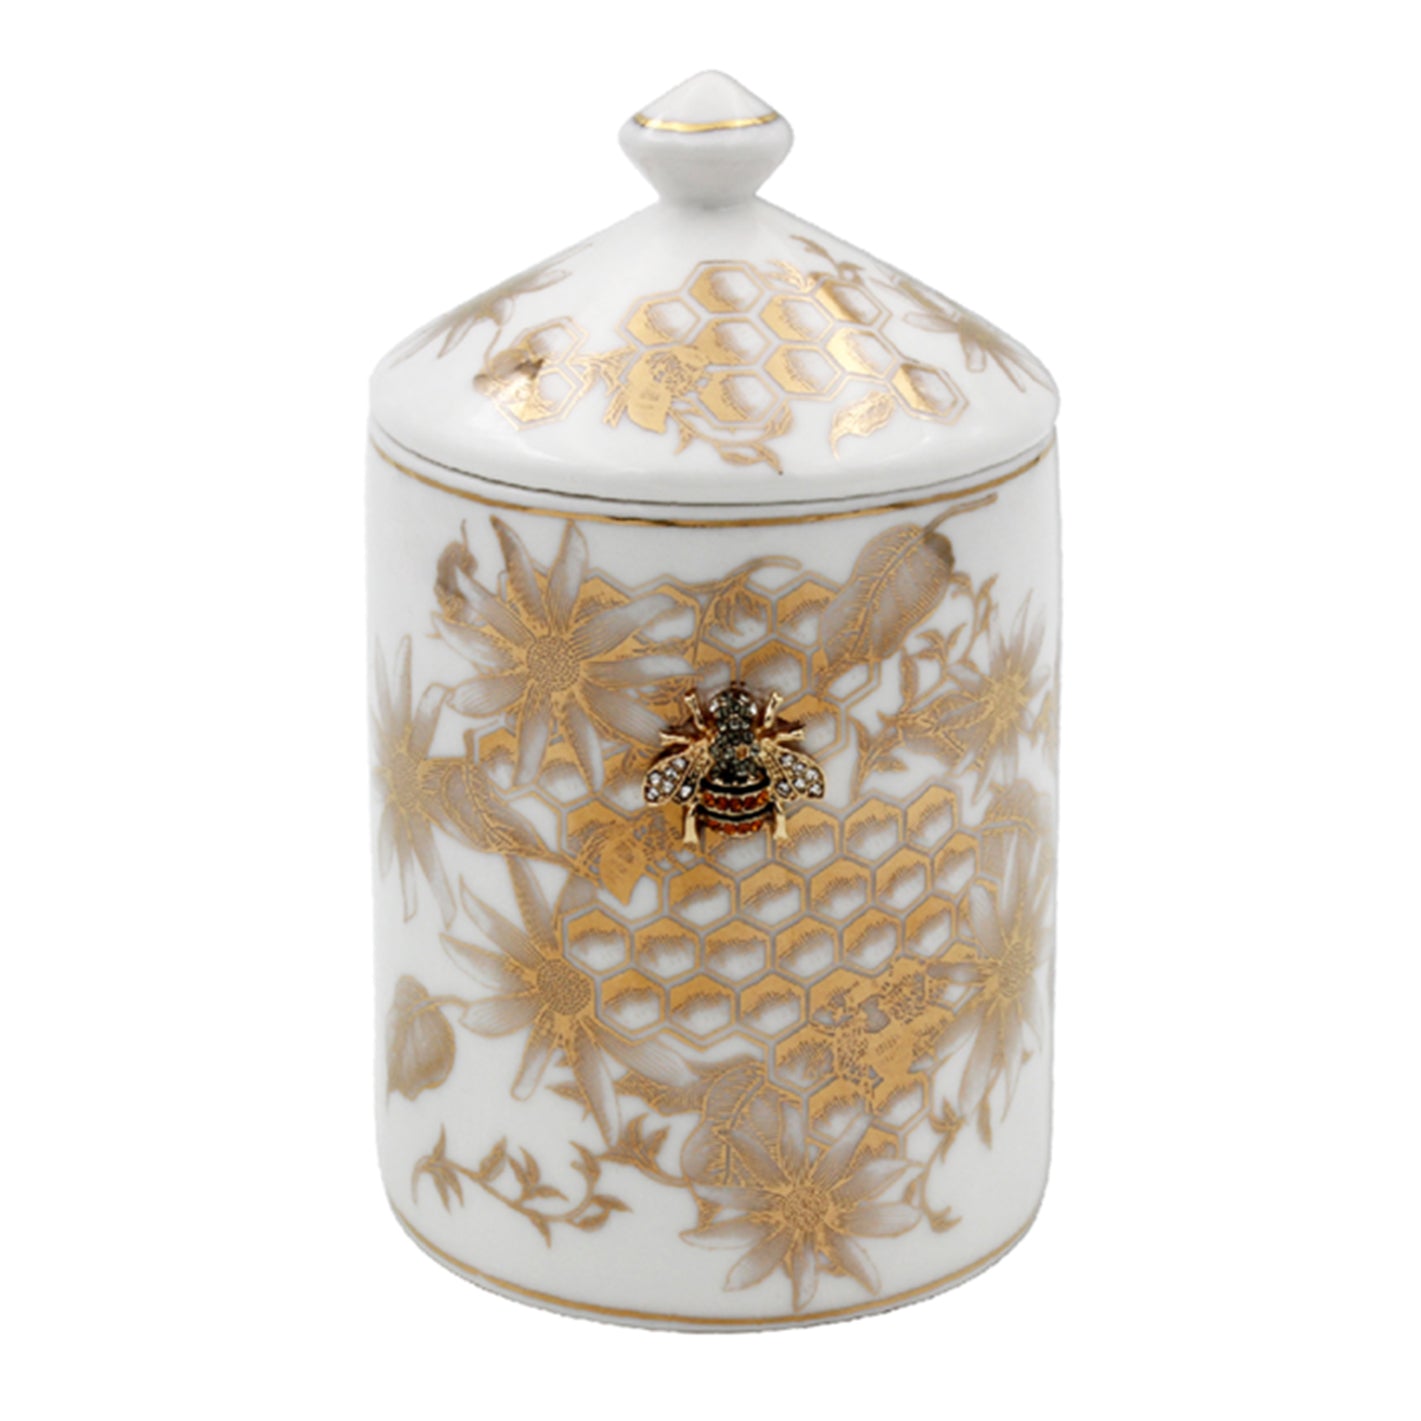 Honeycomb Bee Scented Candle - Floral Honey